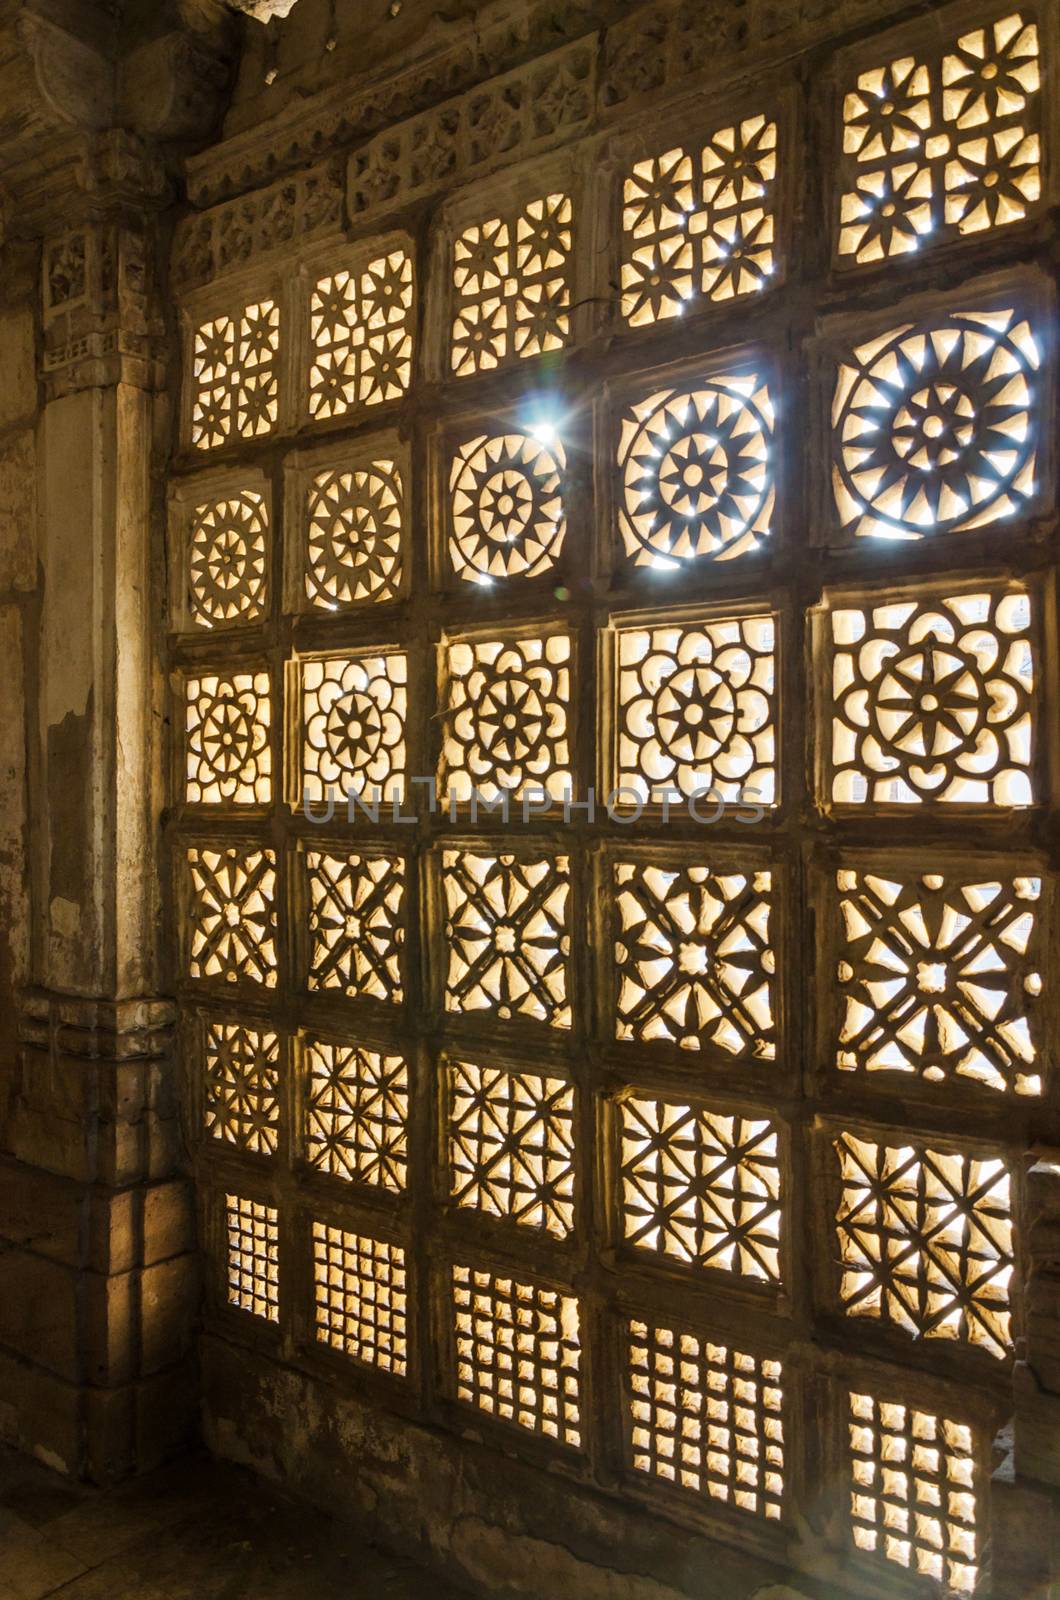 Carved stone grilles pattern at Sarkhej Roza mosque in Ahmedabad, India